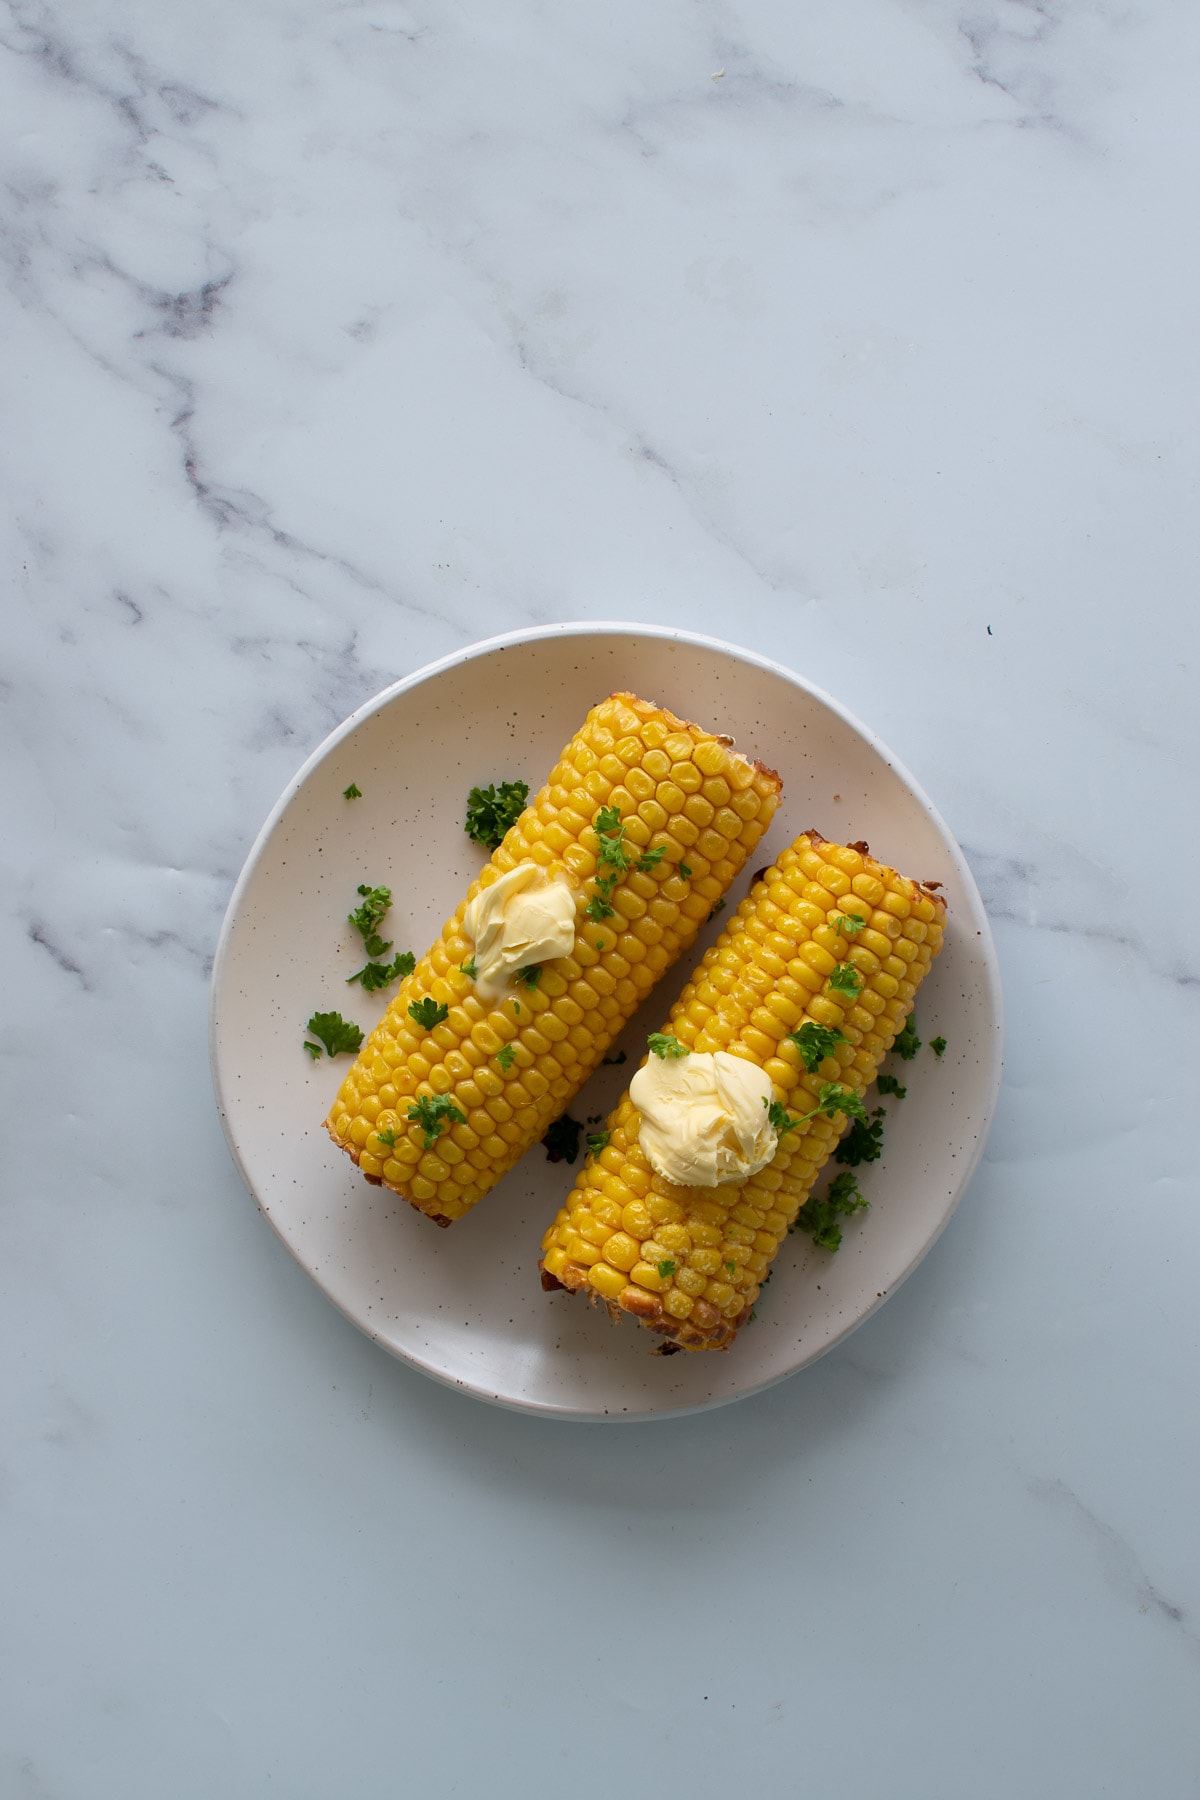 Two roasted cobs of corn on a white plate with parsley and butter on top.